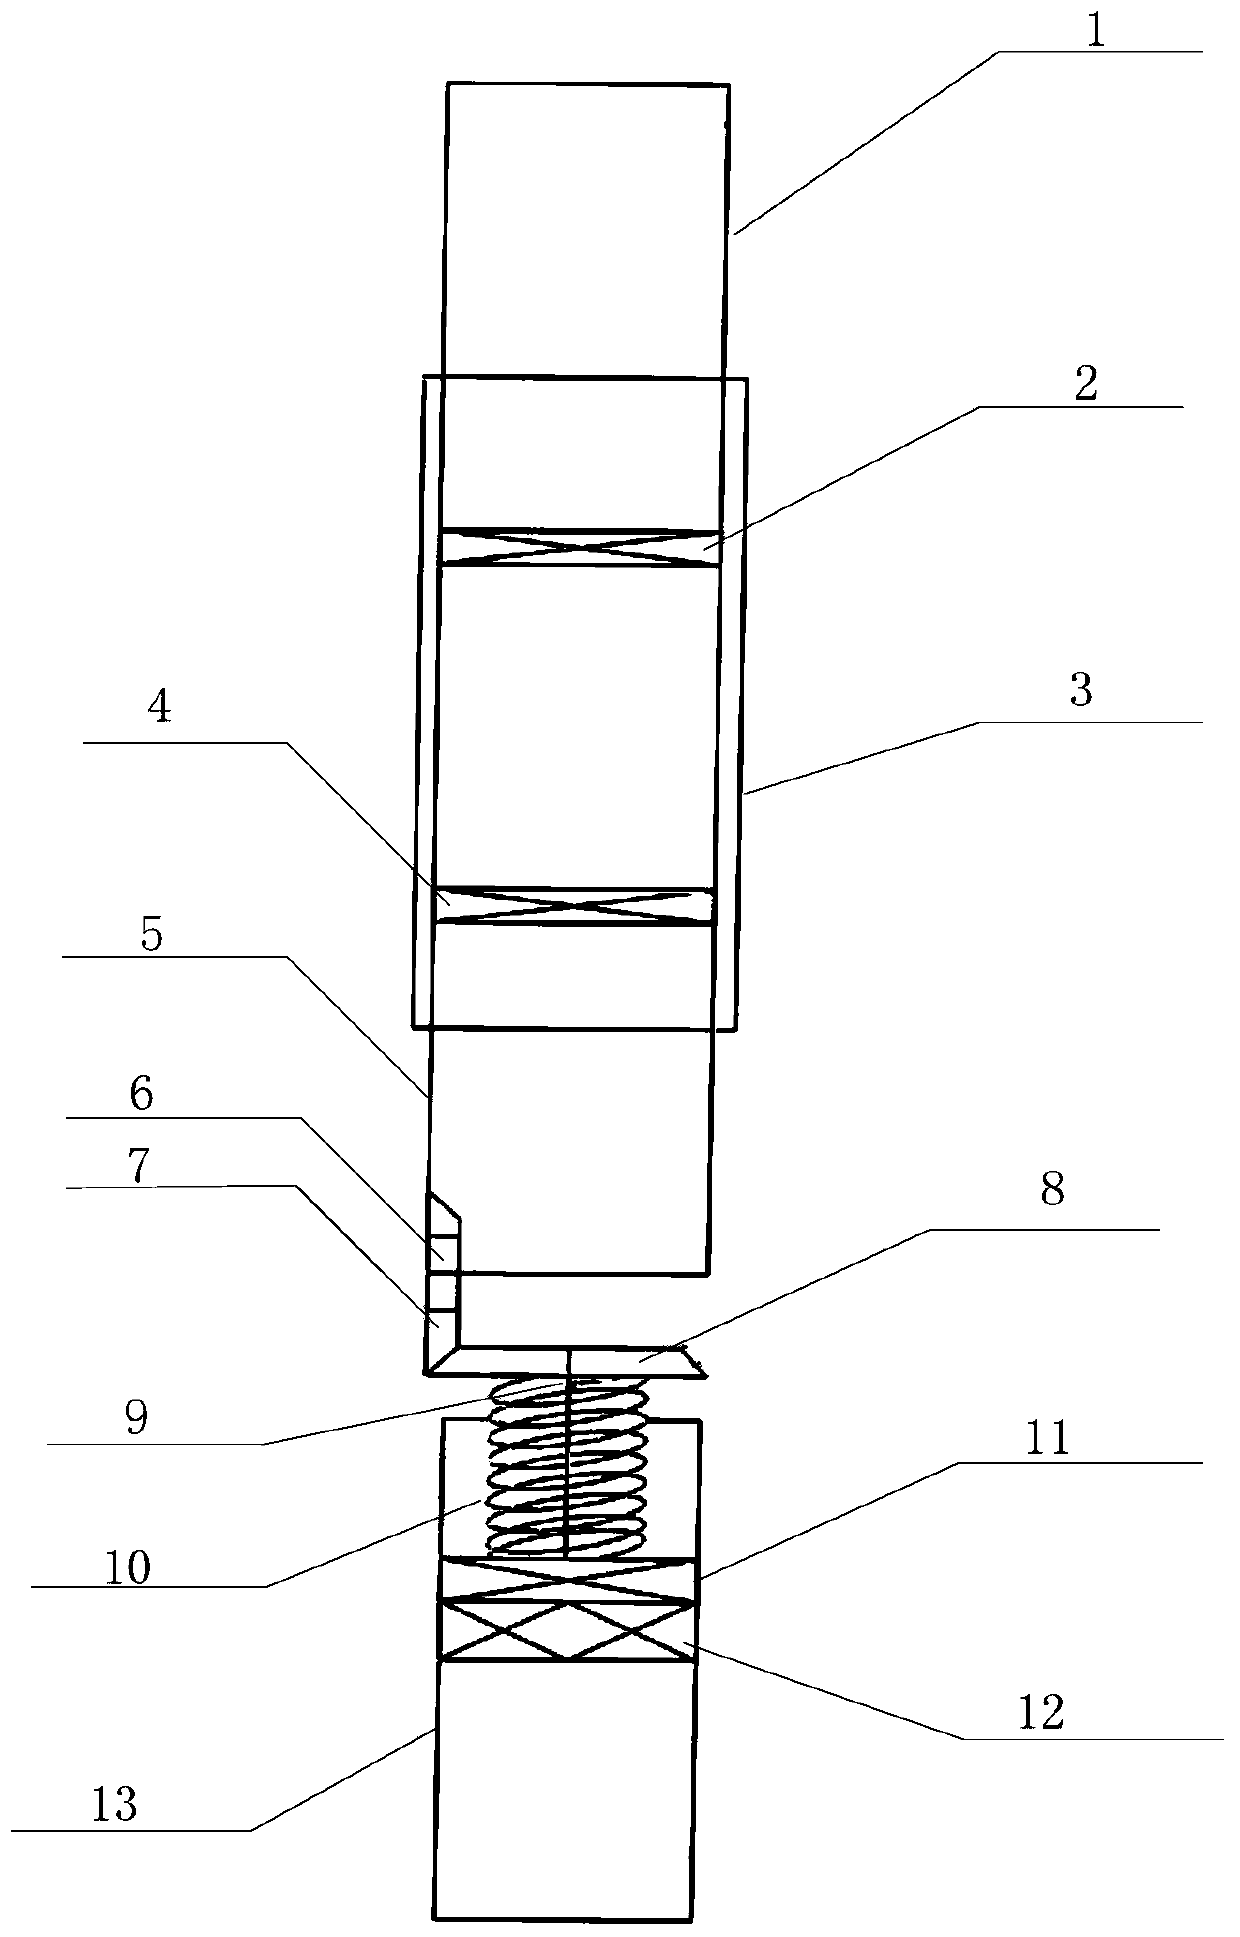 Flexible mechanical arm device capable of actively and passively adjusting rigidity